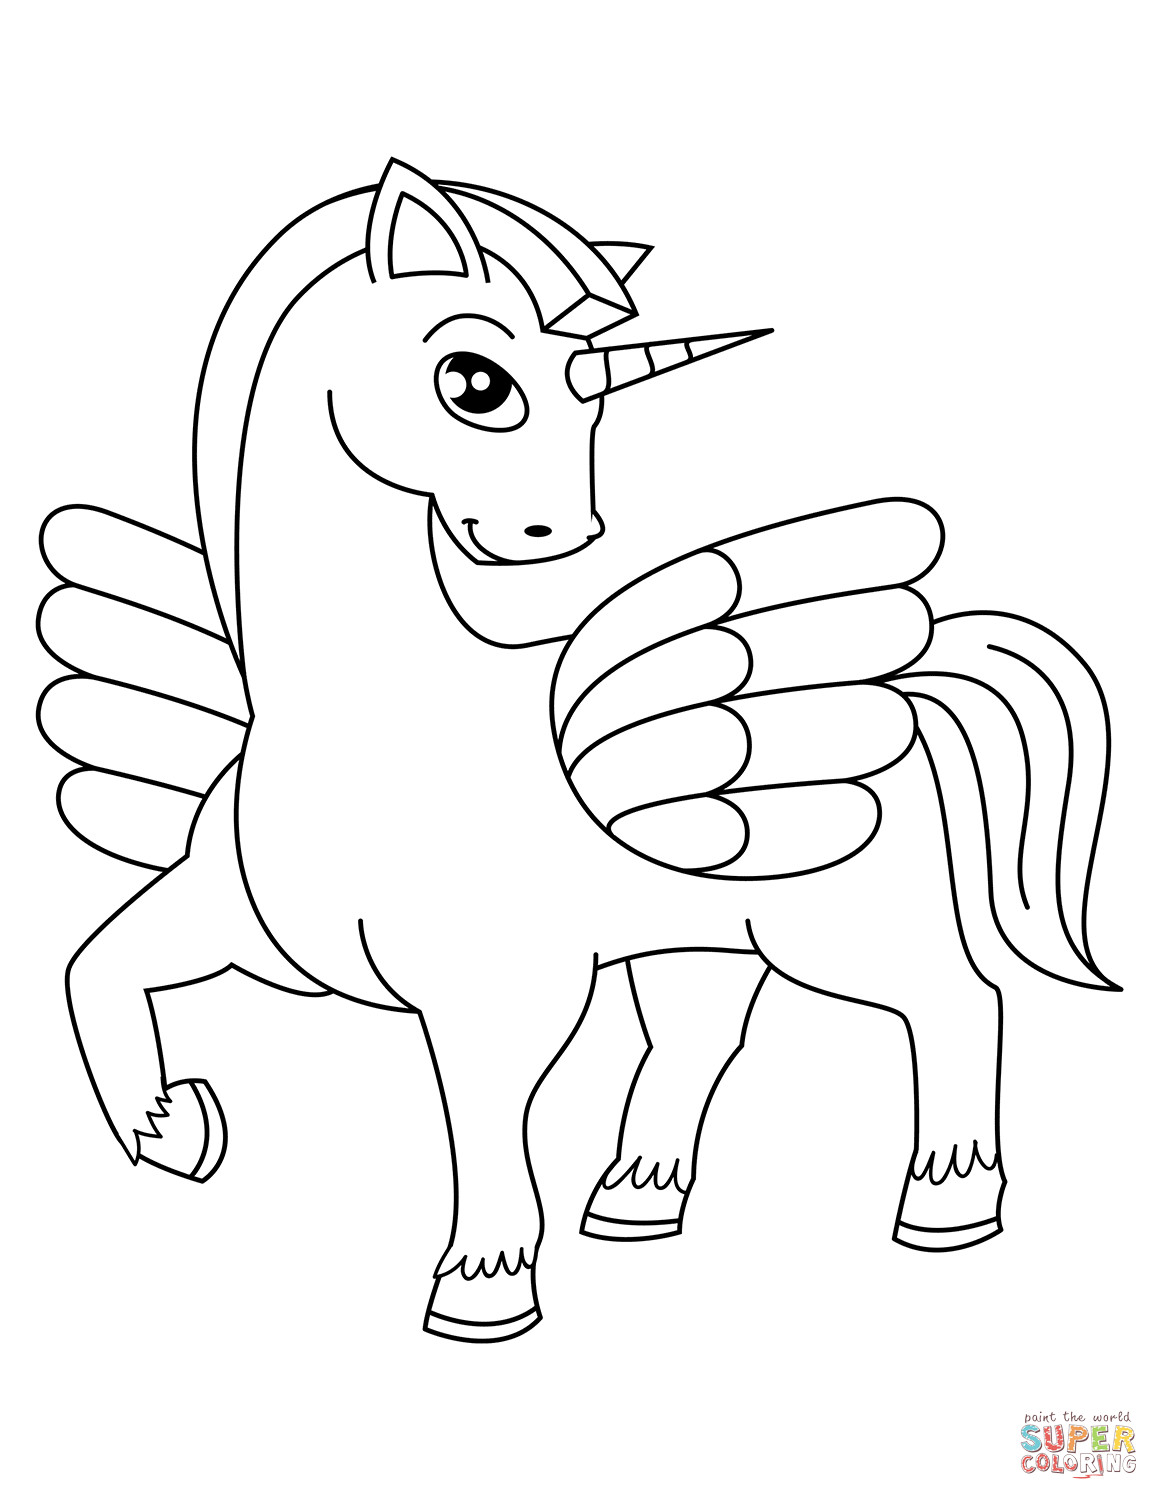 Printable Coloring Pages Unicorn
 Cute Winged Unicorn coloring page